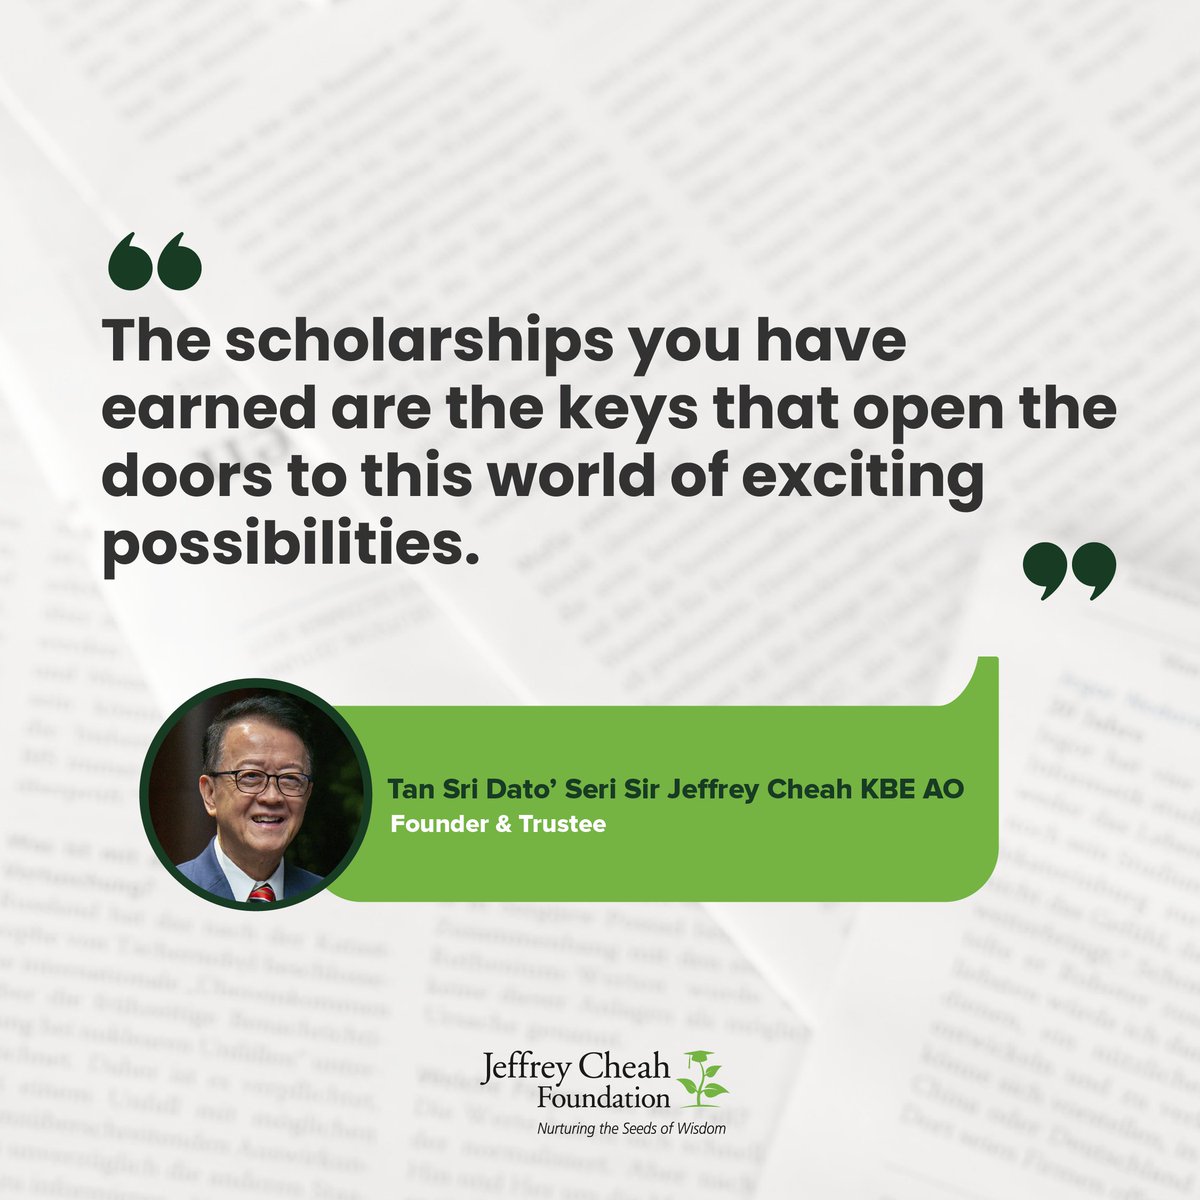 An investment in education is an investment for the future, therefore it is our mission to make quality education accessible for all through the Jeffrey Cheah Foundation scholarships. 

#JeffreyCheahFoundation #JCFScholars #QualityEducation #SeedsofWisdom